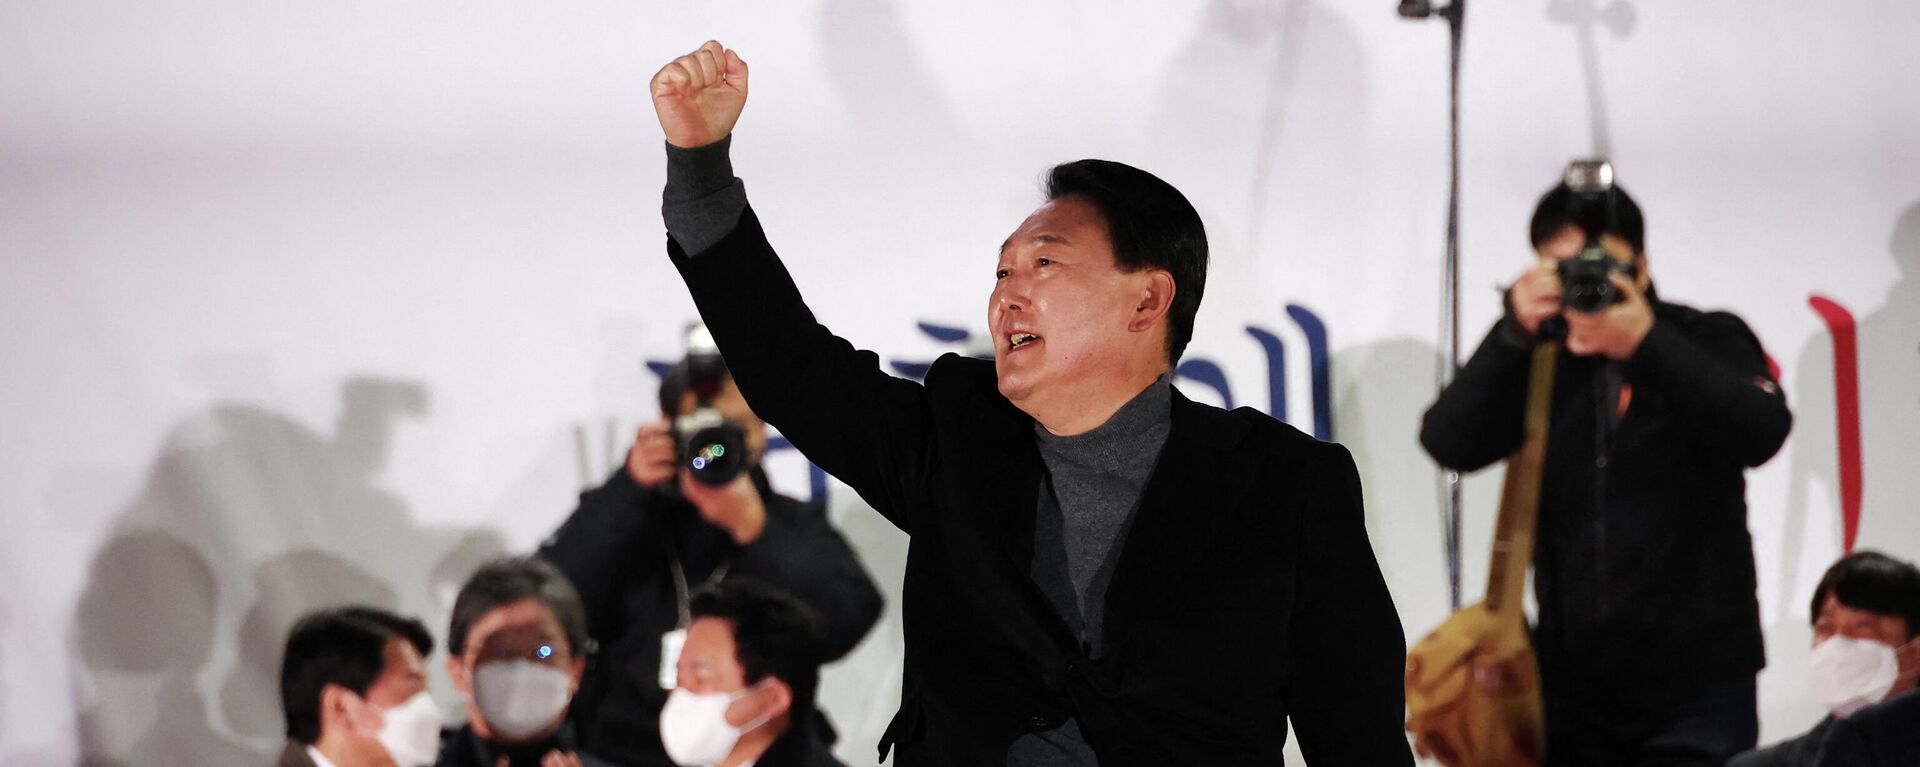 Yoon Suk-yeol, the presidential election candidate of South Korea's main opposition People Power Party (PPP), gestures during his election campaign rally in Seoul, South Korea March 8, 2022 - Sputnik International, 1920, 11.03.2022